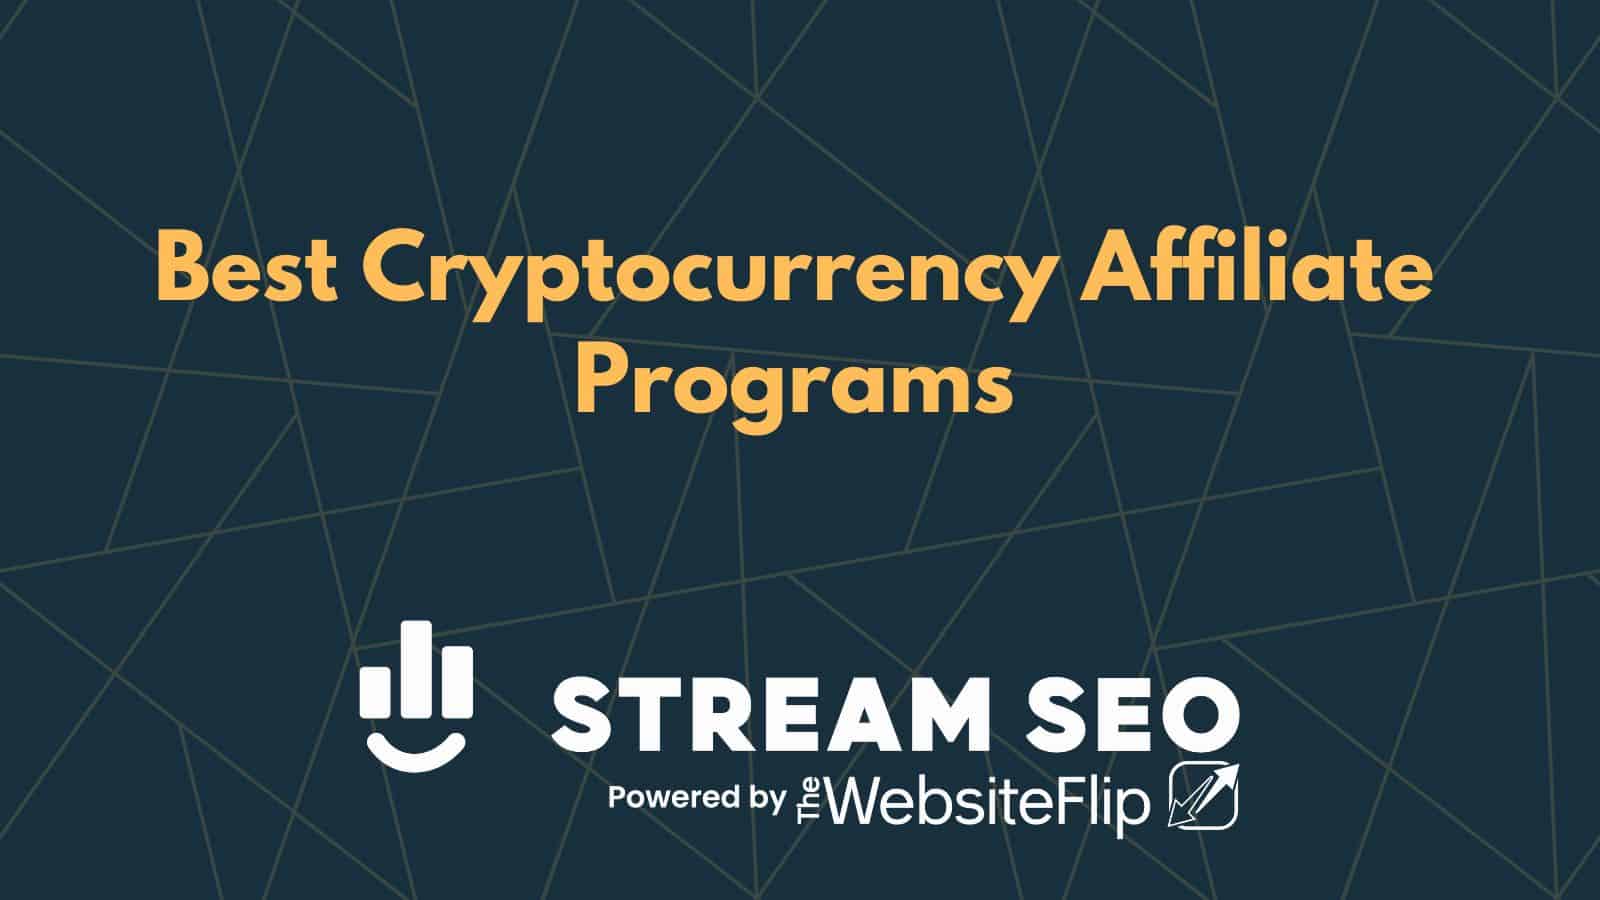 9 Best Cryptocurrency Affiliate Programs